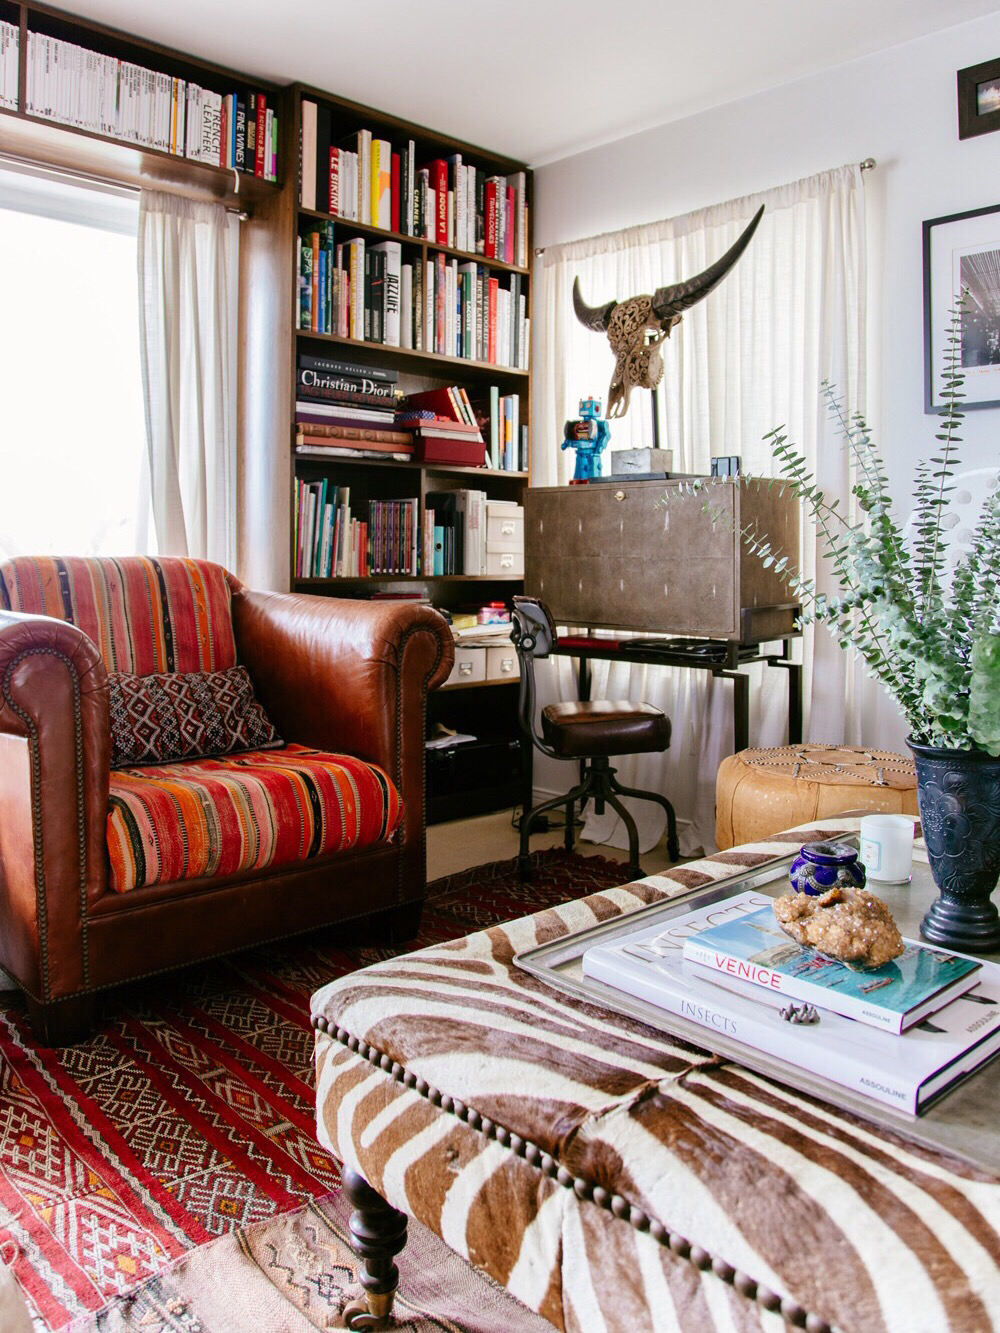 THE NEW BOHEMIANS • COOL & COLLECTED HOMES IS OUT! — OLD BRAND NEW